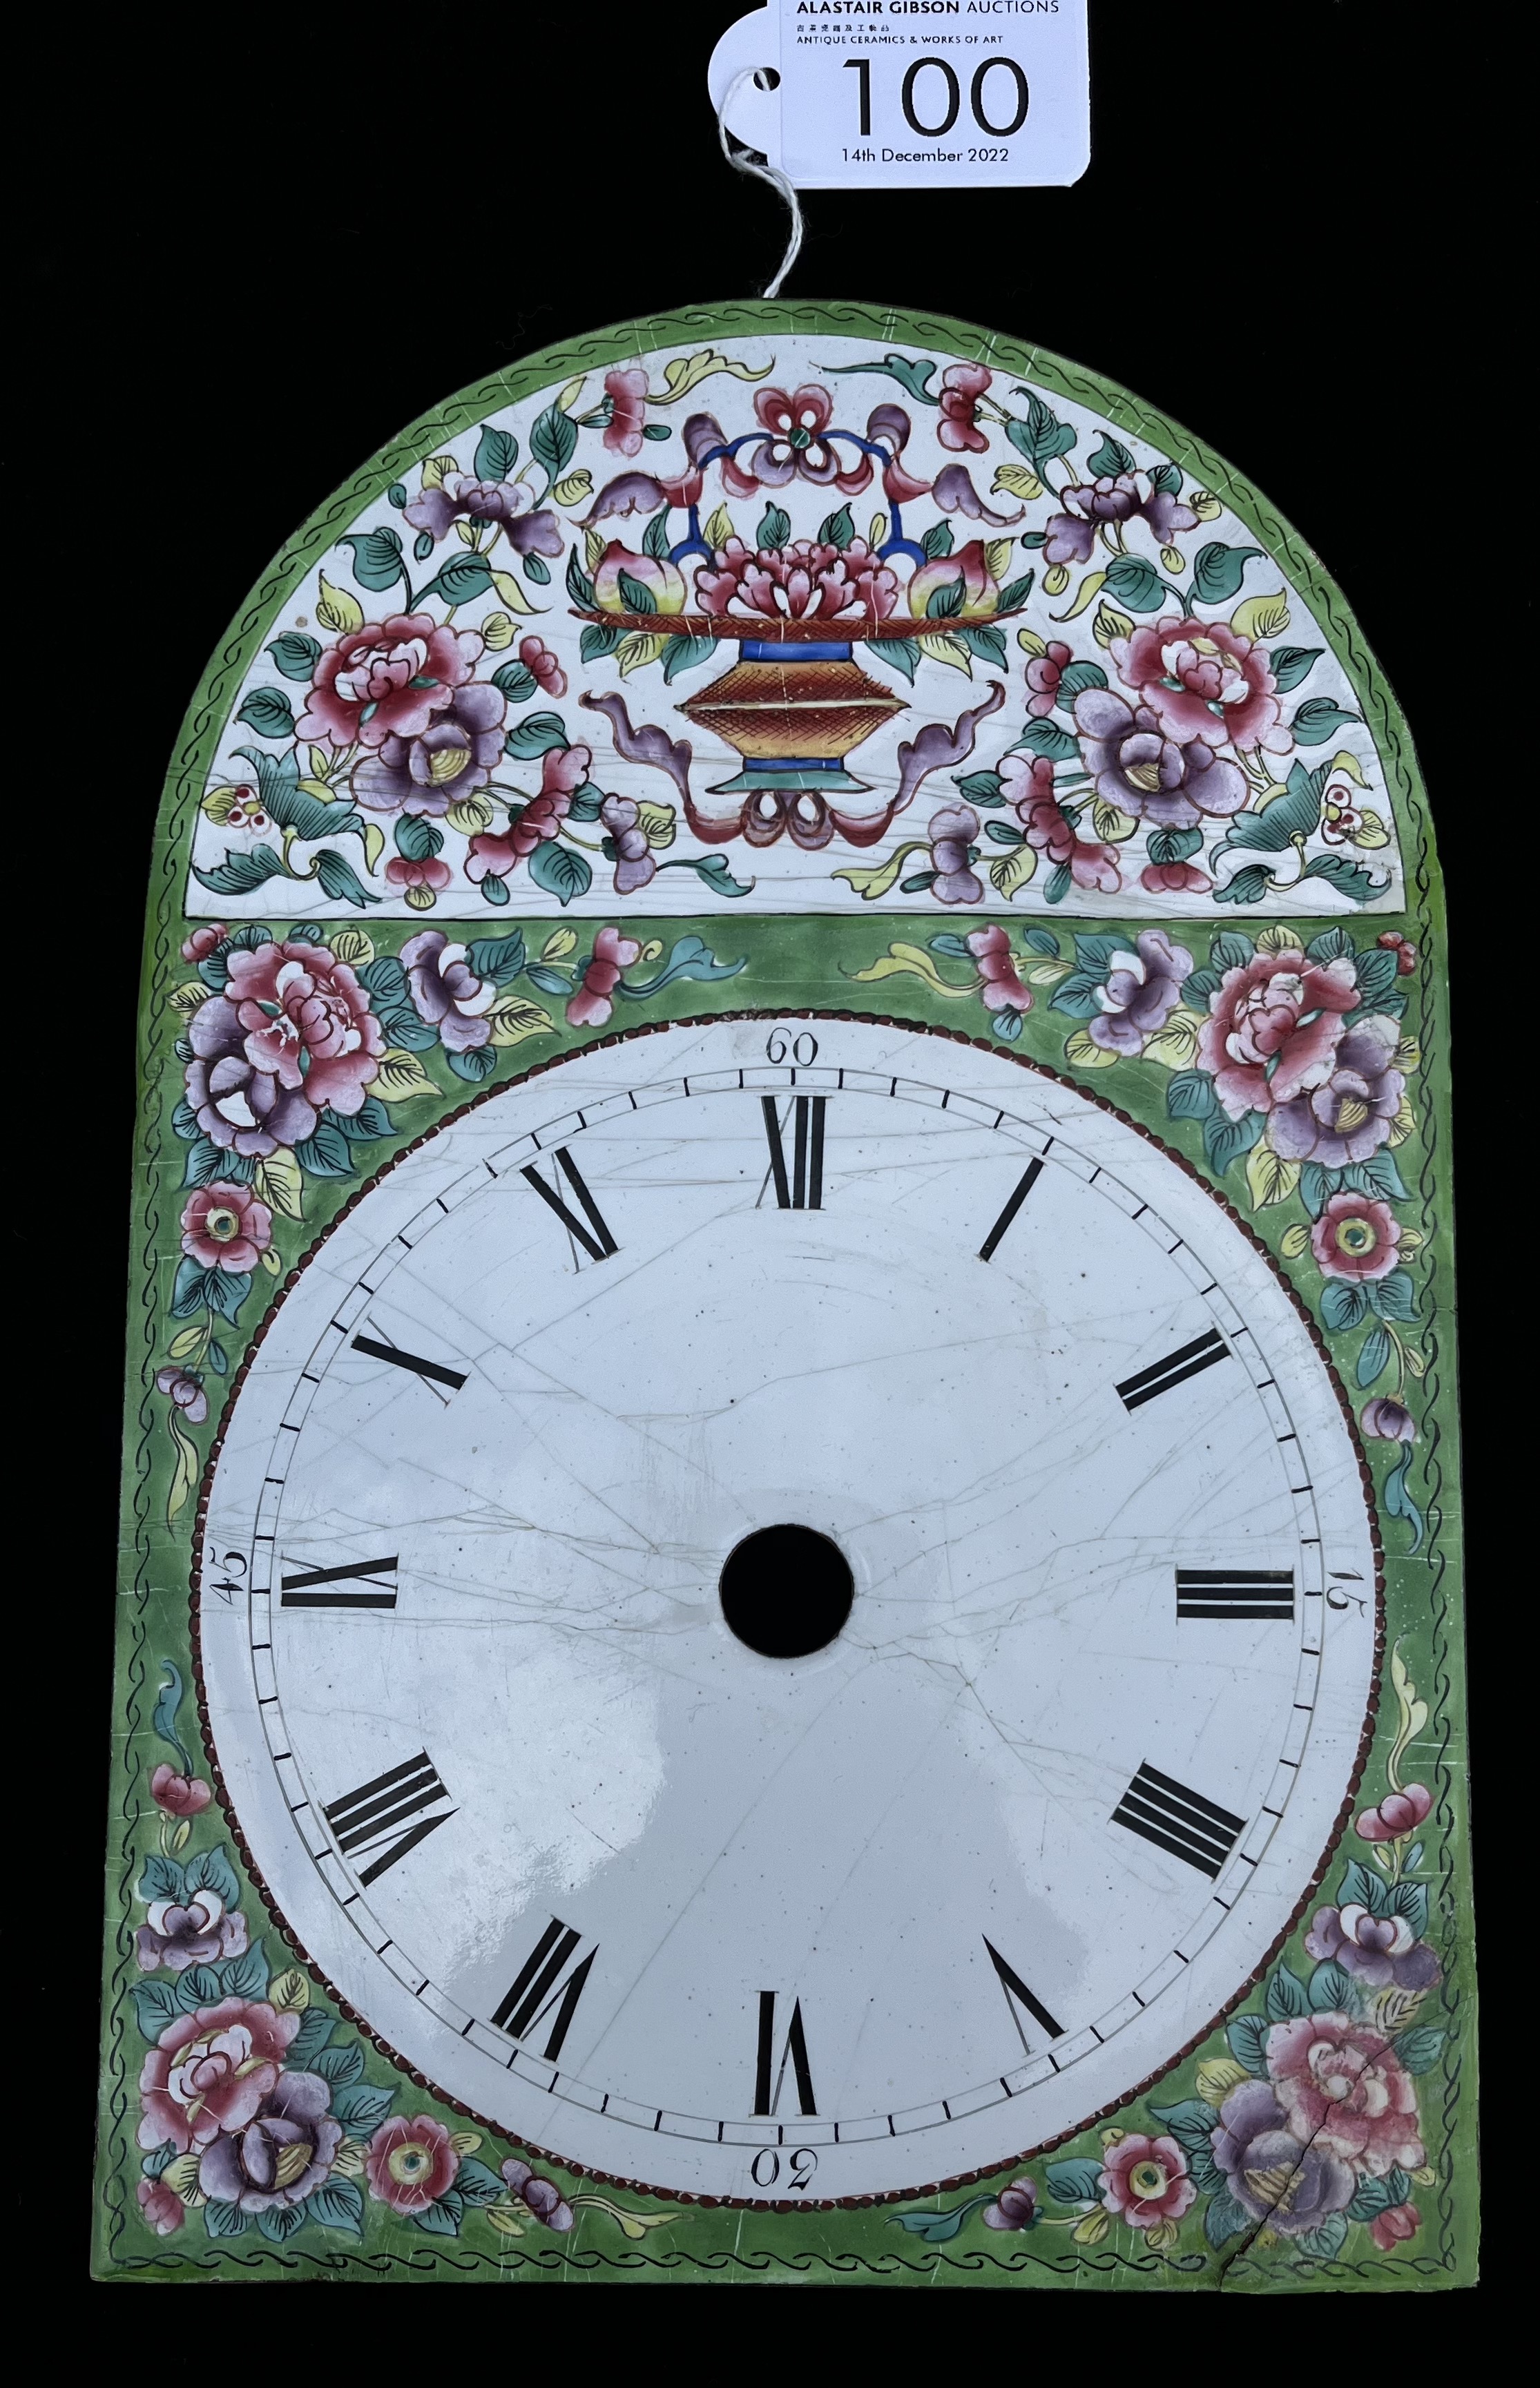 A RARE CANTON ENAMEL CLOCK FACE, QING DYNASTY, LATE 18TH/EARLY 19TH CENTURY - Image 2 of 11